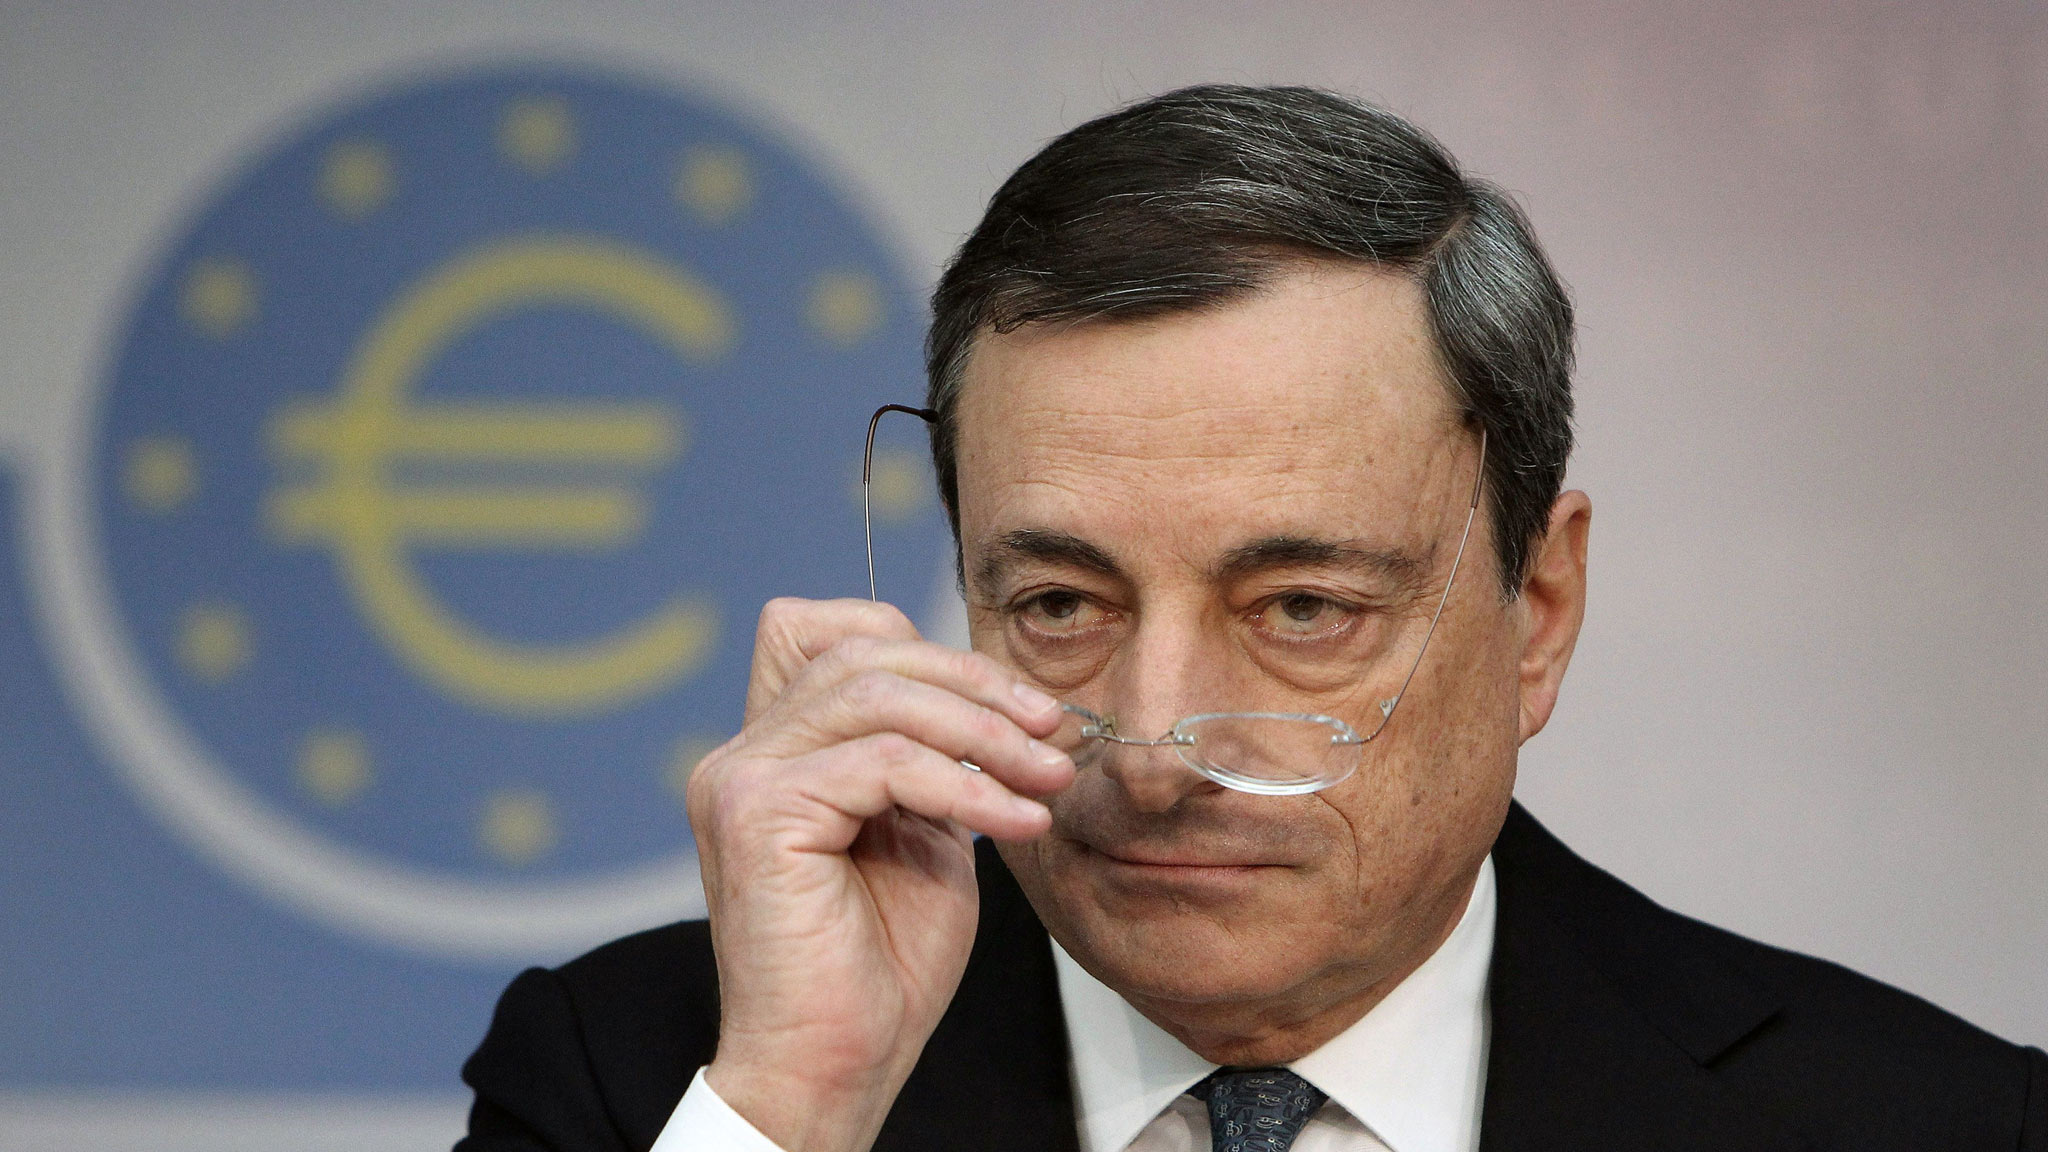 Draghi Worries About U.S. Protectionism as Euro Area Strengthens